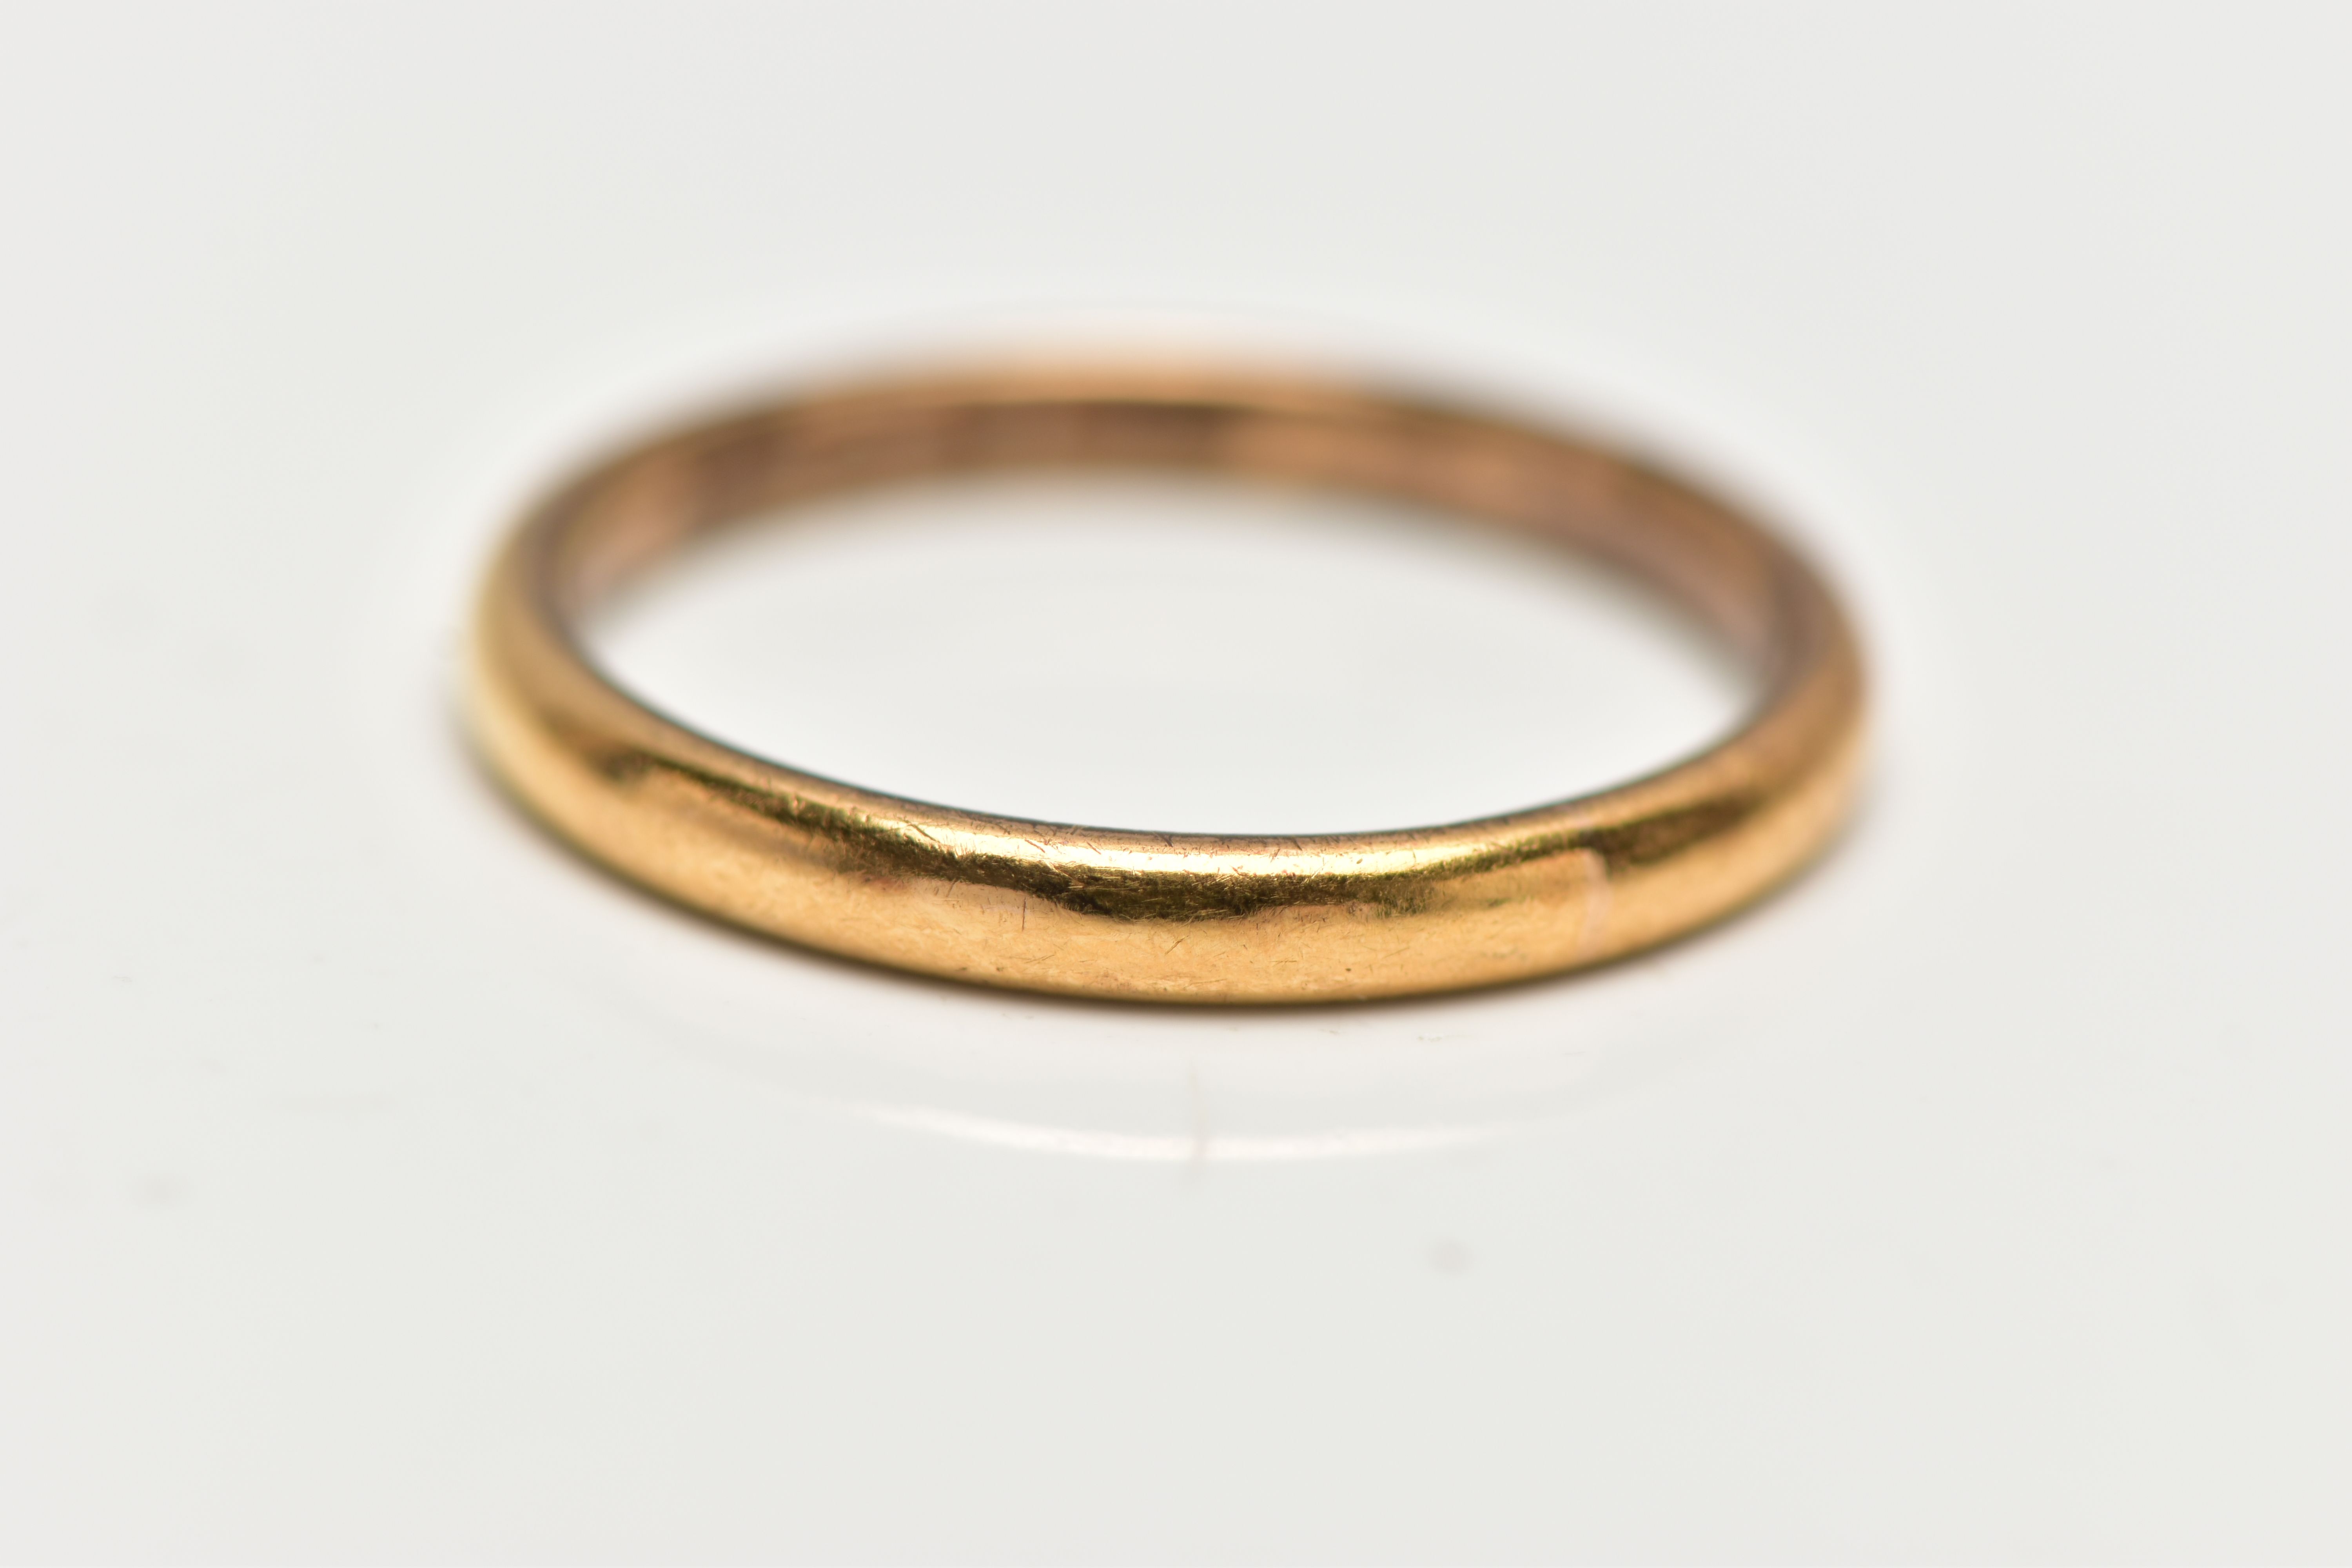 A THIN 22CT GOLD BAND RING, plain polished thin band, approximate width 2.2mm, ring size J, - Image 2 of 2